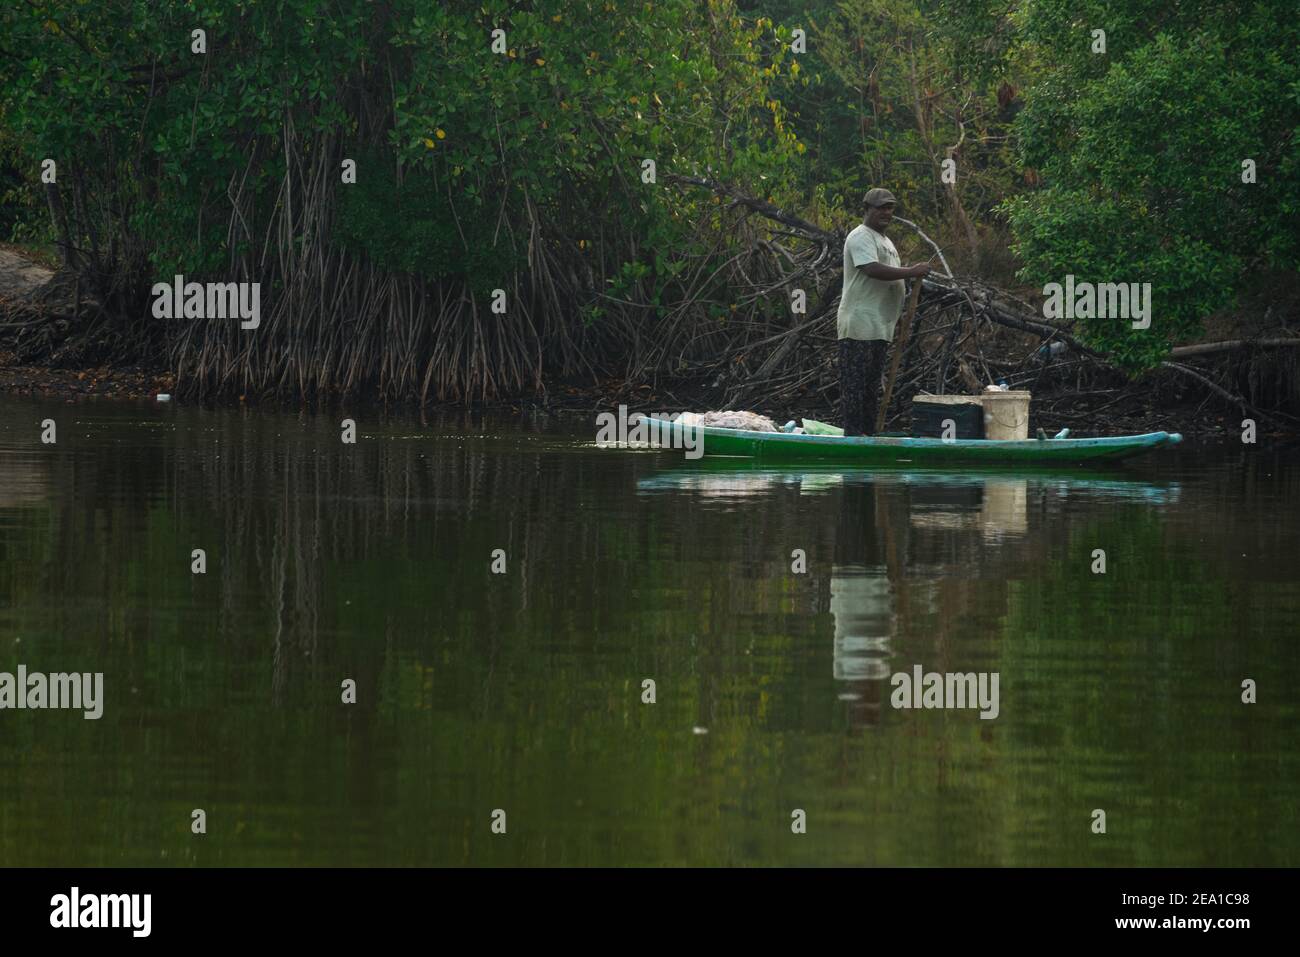 Sinhalese man fishing on a river in a boat Stock Photo